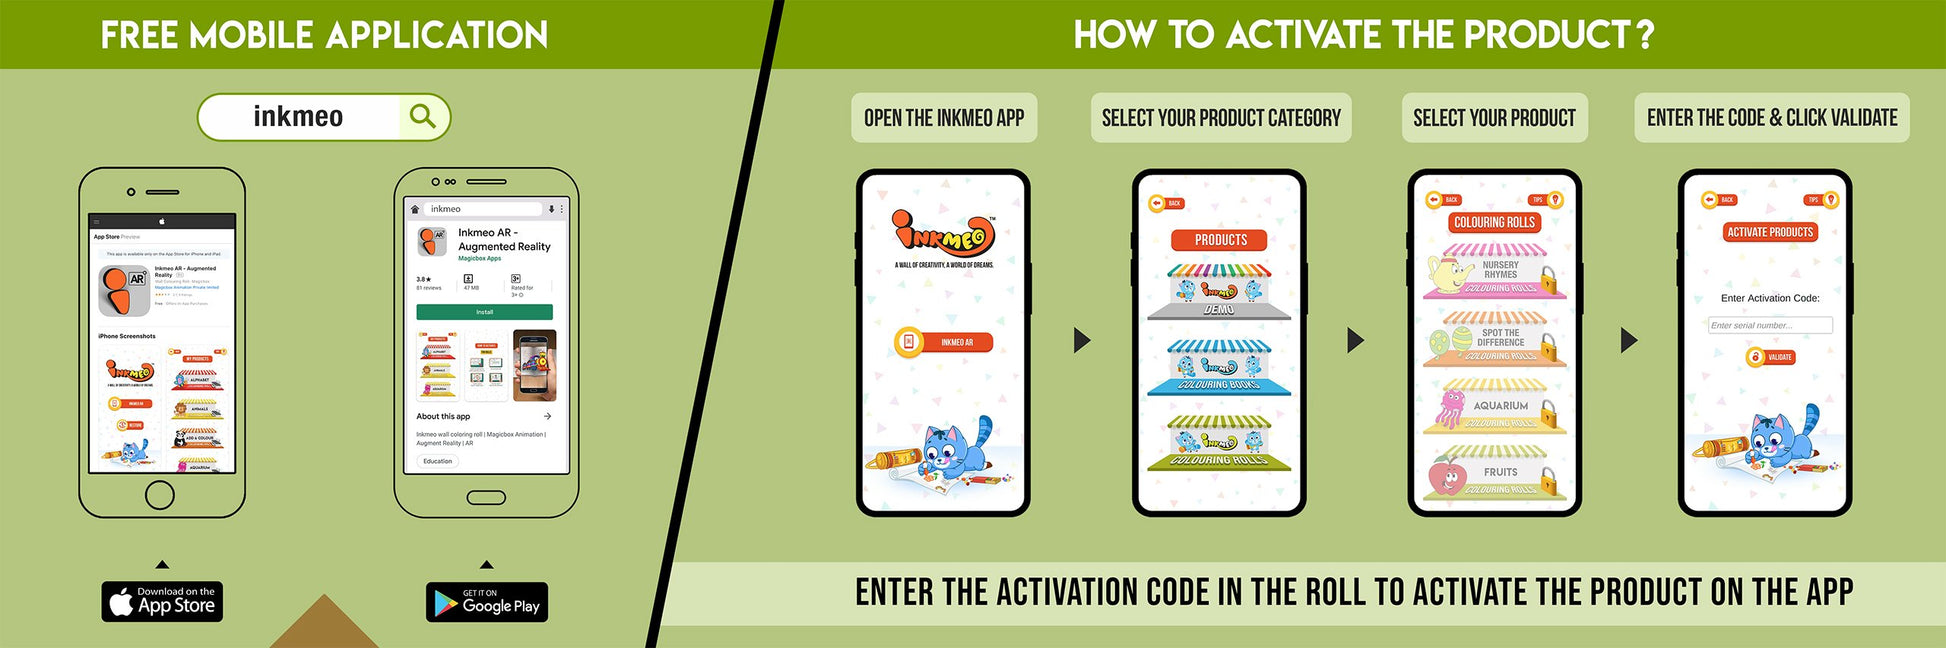 The image has a green background which is divided into two parts. The first part shows a free mobile application for downloading the Inkmeo app in the App Store and Google Store. The second part shows four mobile phones with the caption "To open the Inkmeo app, select your product category, select your product, and enter the code & click validate.